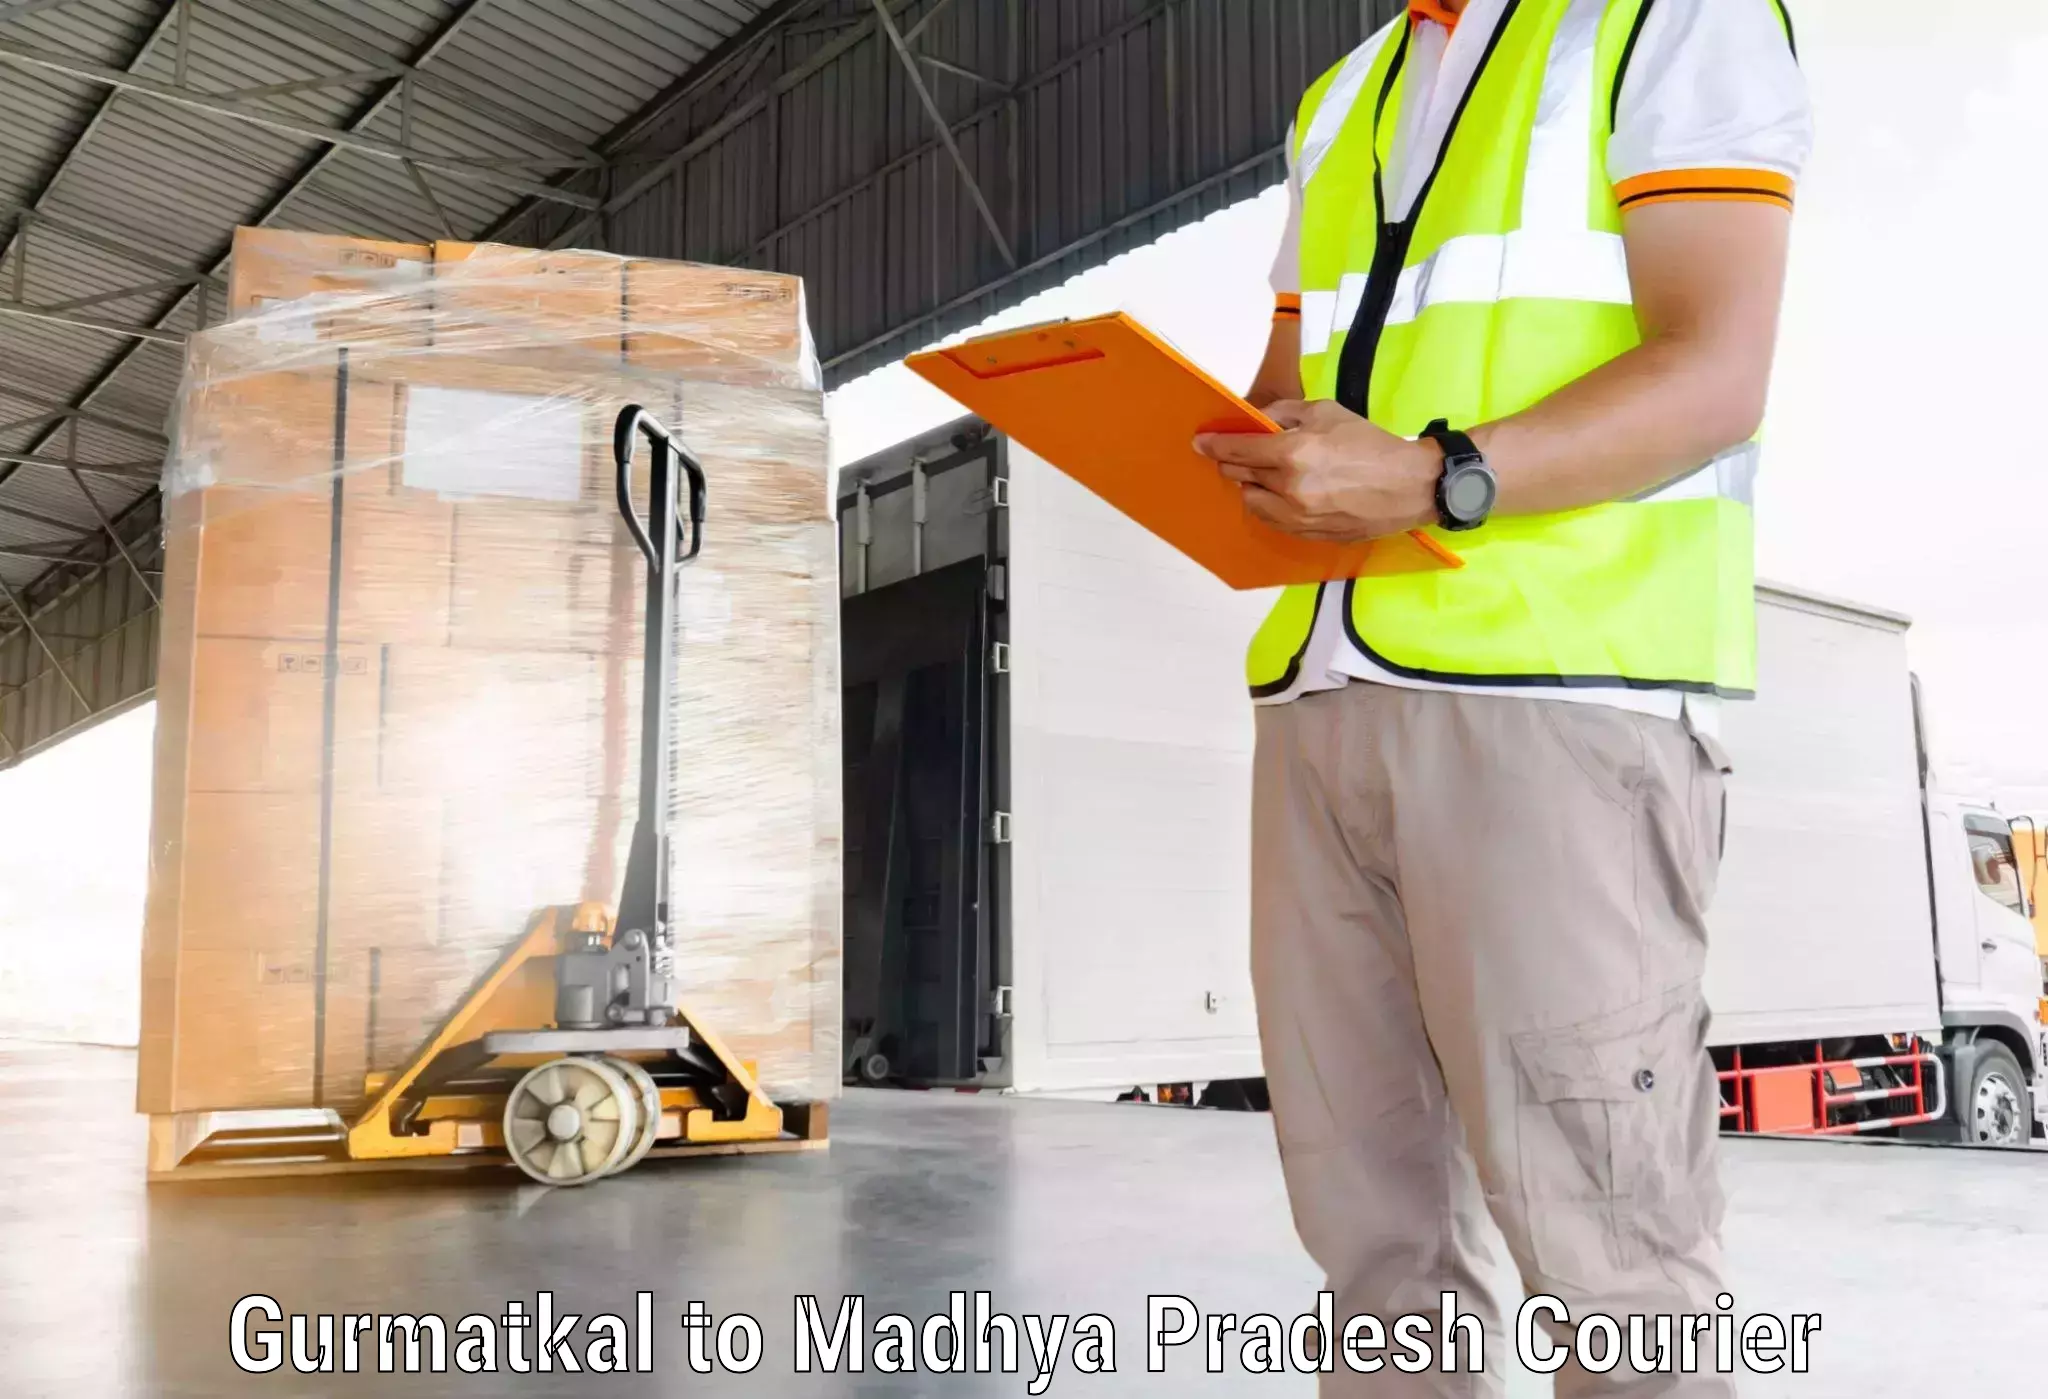 Online courier booking Gurmatkal to Jhunku